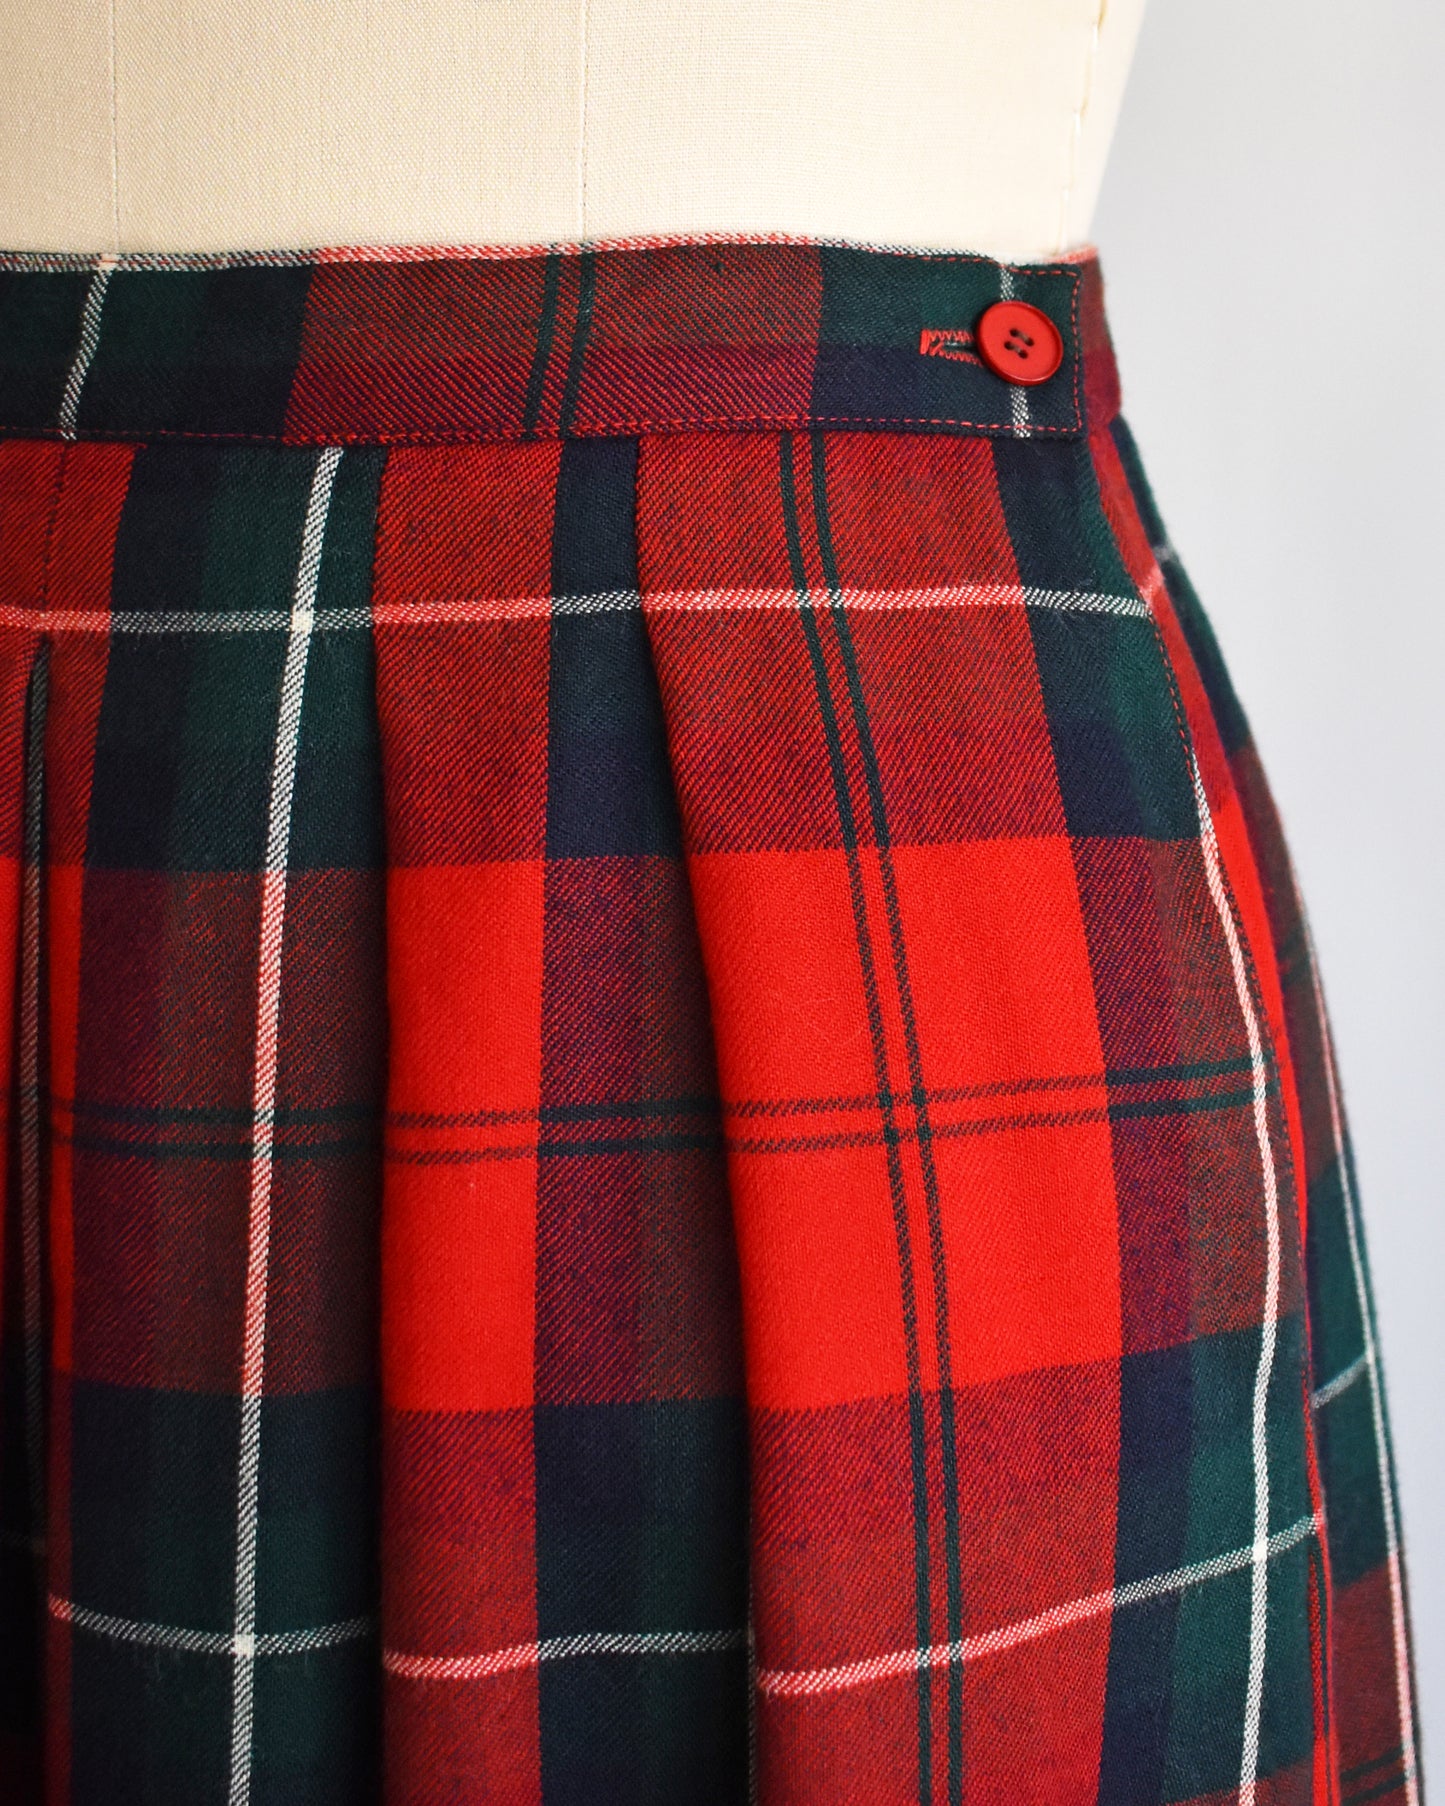 Close up of a the red button on the side of the skirt